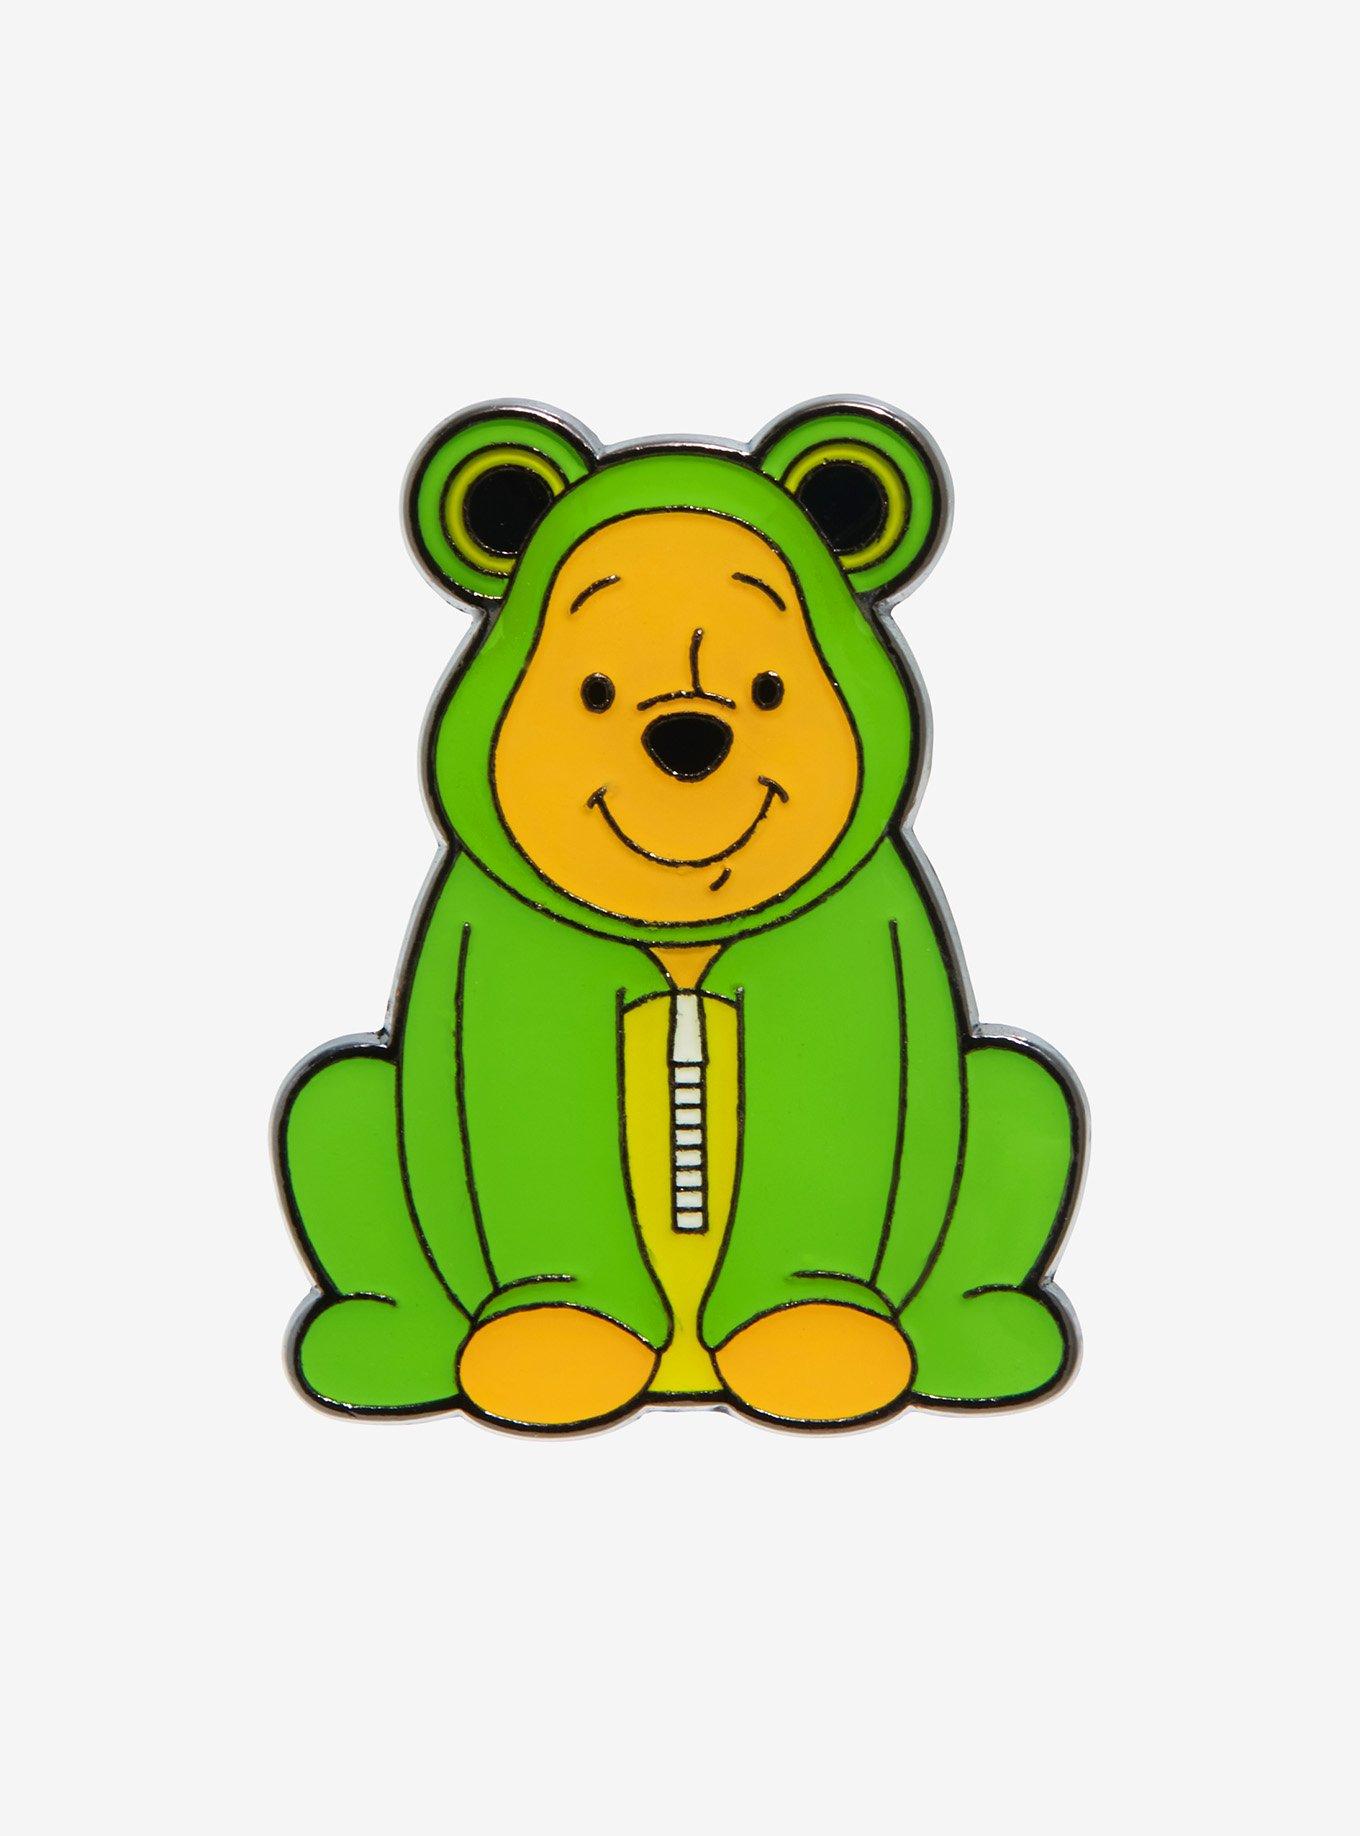 Disney Winnie The Pooh Patches Pooh Bear Anime Cartoon Clothes Patches  Garment Stickers Embroidery Cloth Stickers